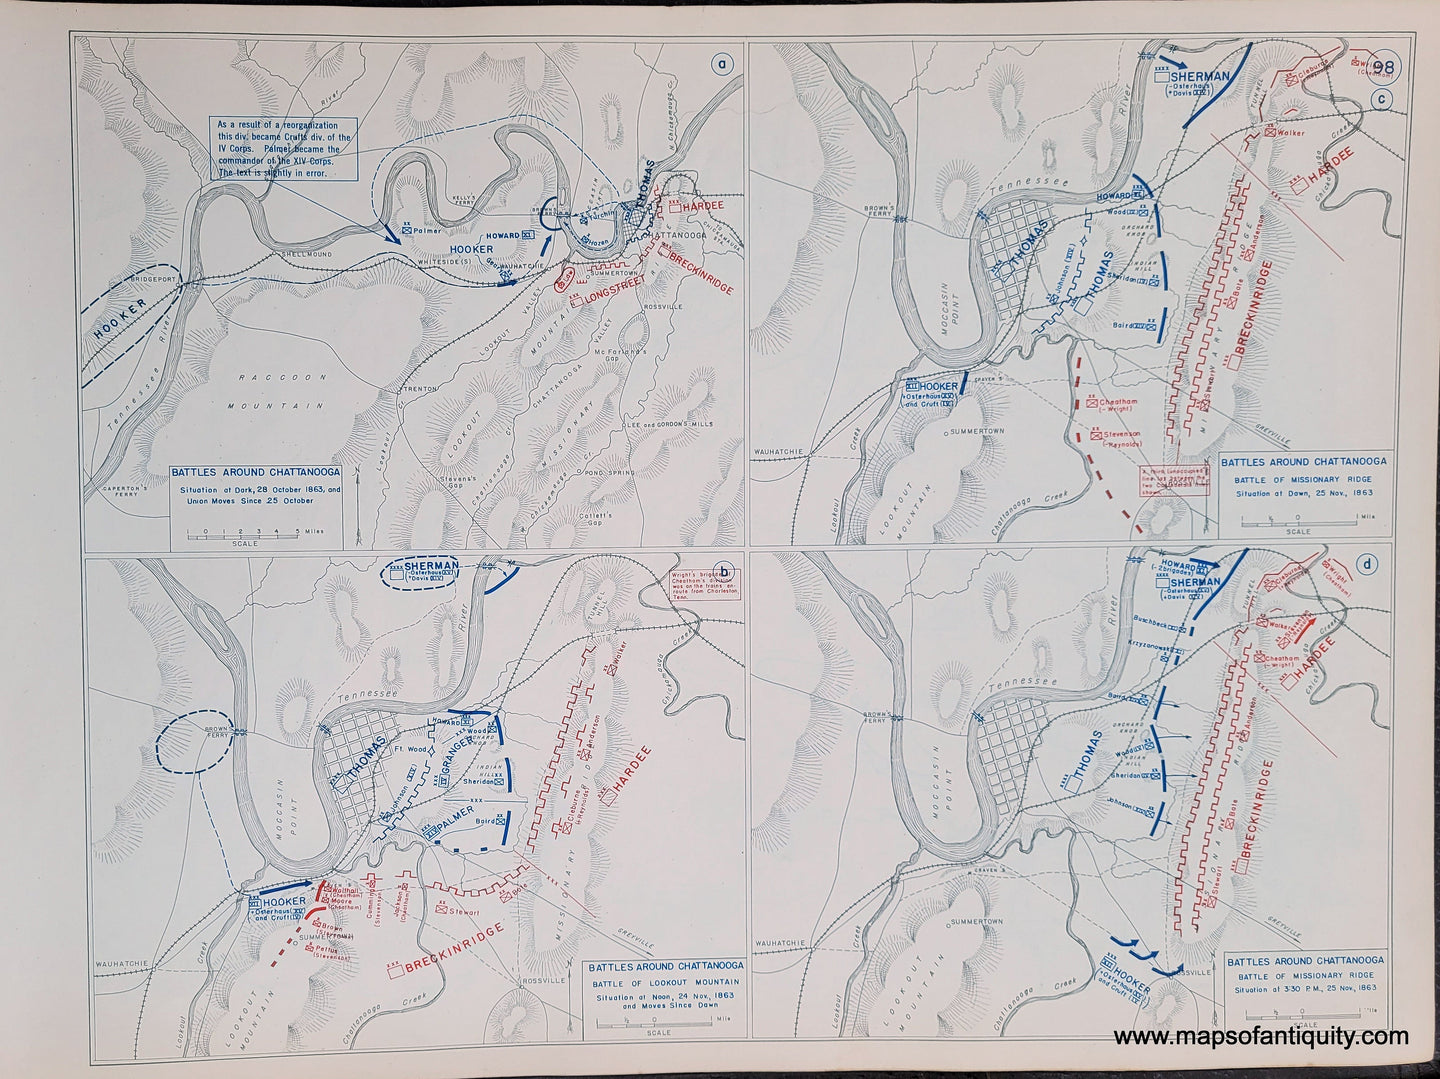 Genuine-Antique-Map-Battles-Around-Chattanooga-Battle-of-Missionary-Ridge-and-Battle-of-Lookout-Mountain-Oct-and-Nov--1863-1948-Matthew-Forney-Steele-Dept-of-Military-Art-and-Engineering-US-Military-Academy-West-Point-Maps-Of-Antiquity